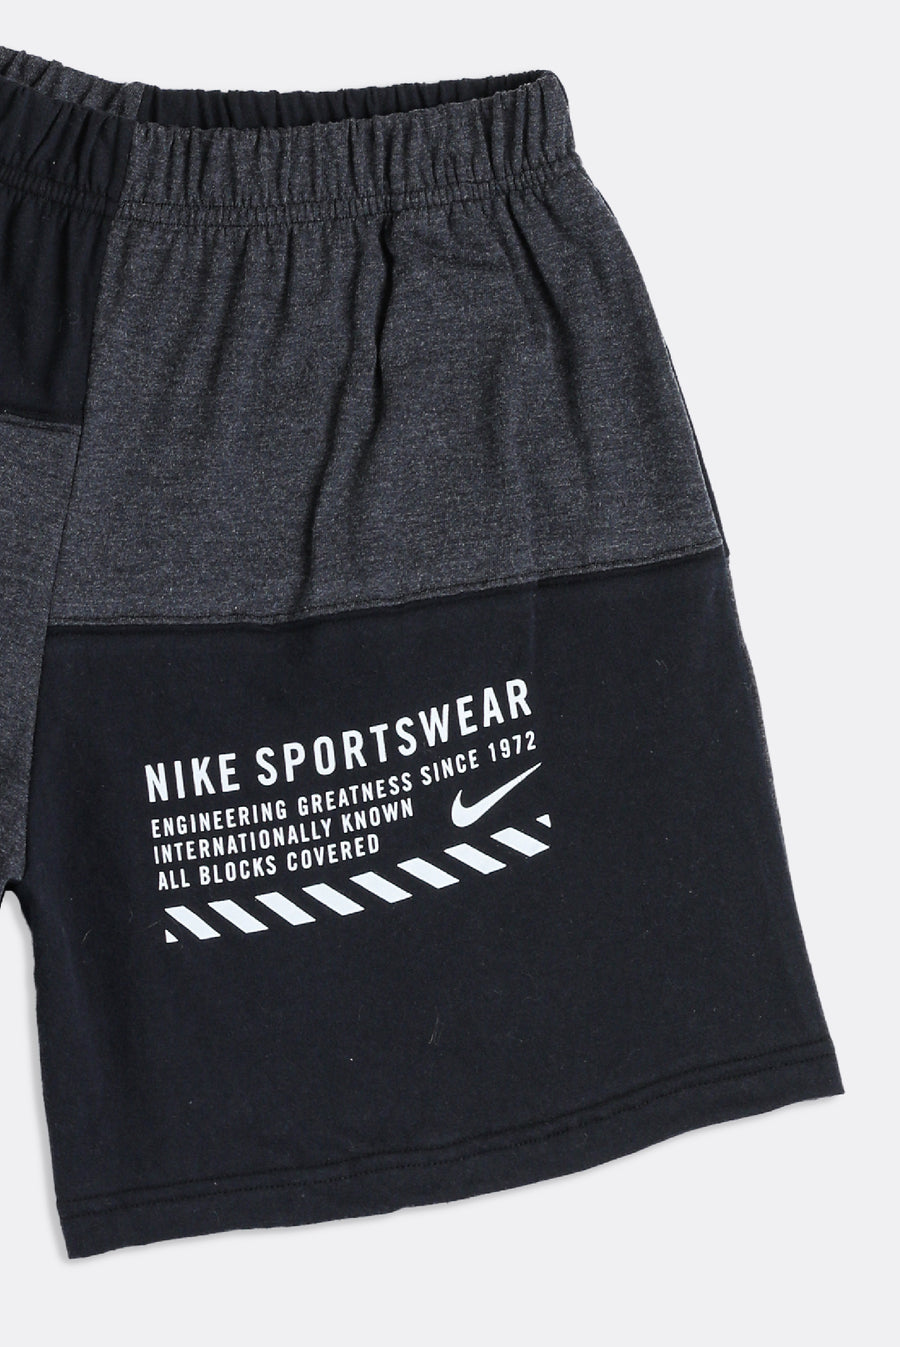 Rework Nike Patchwork Tee Shorts Set - S – Frankie Collective